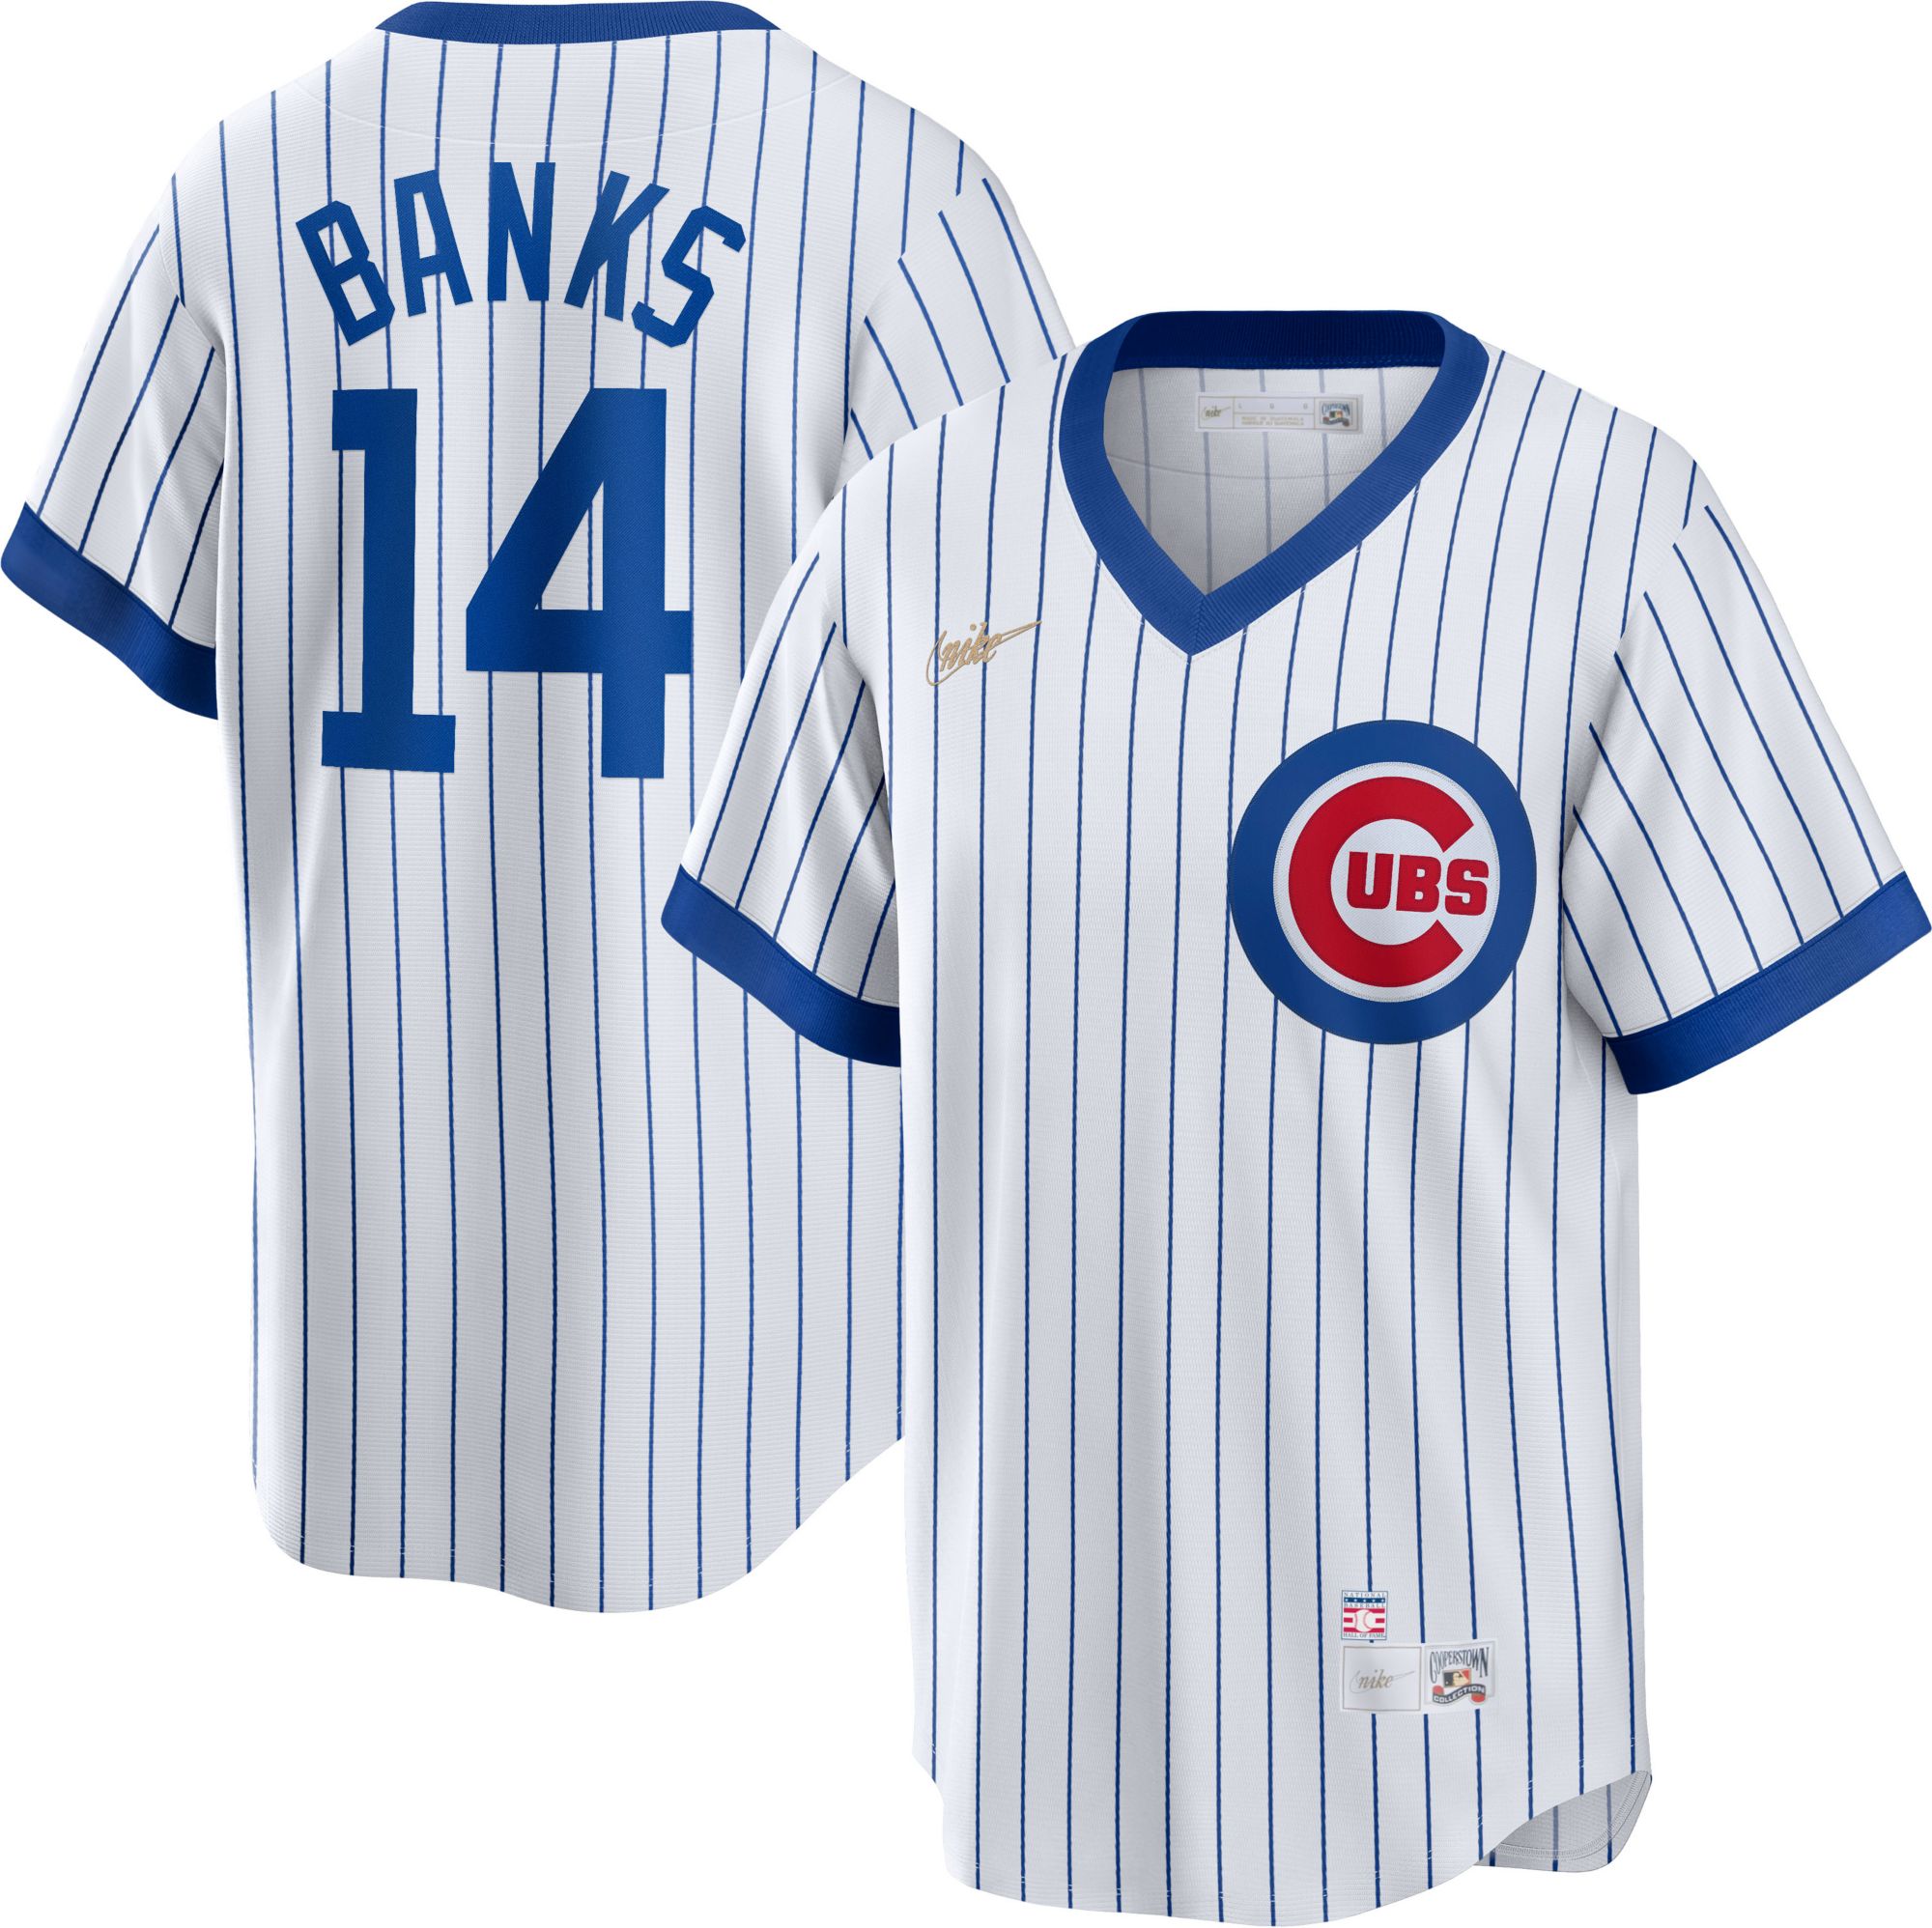 Cubs No14 Ernie Banks Blue Alternate 2016 World Series Champions Stitched Youth Jersey